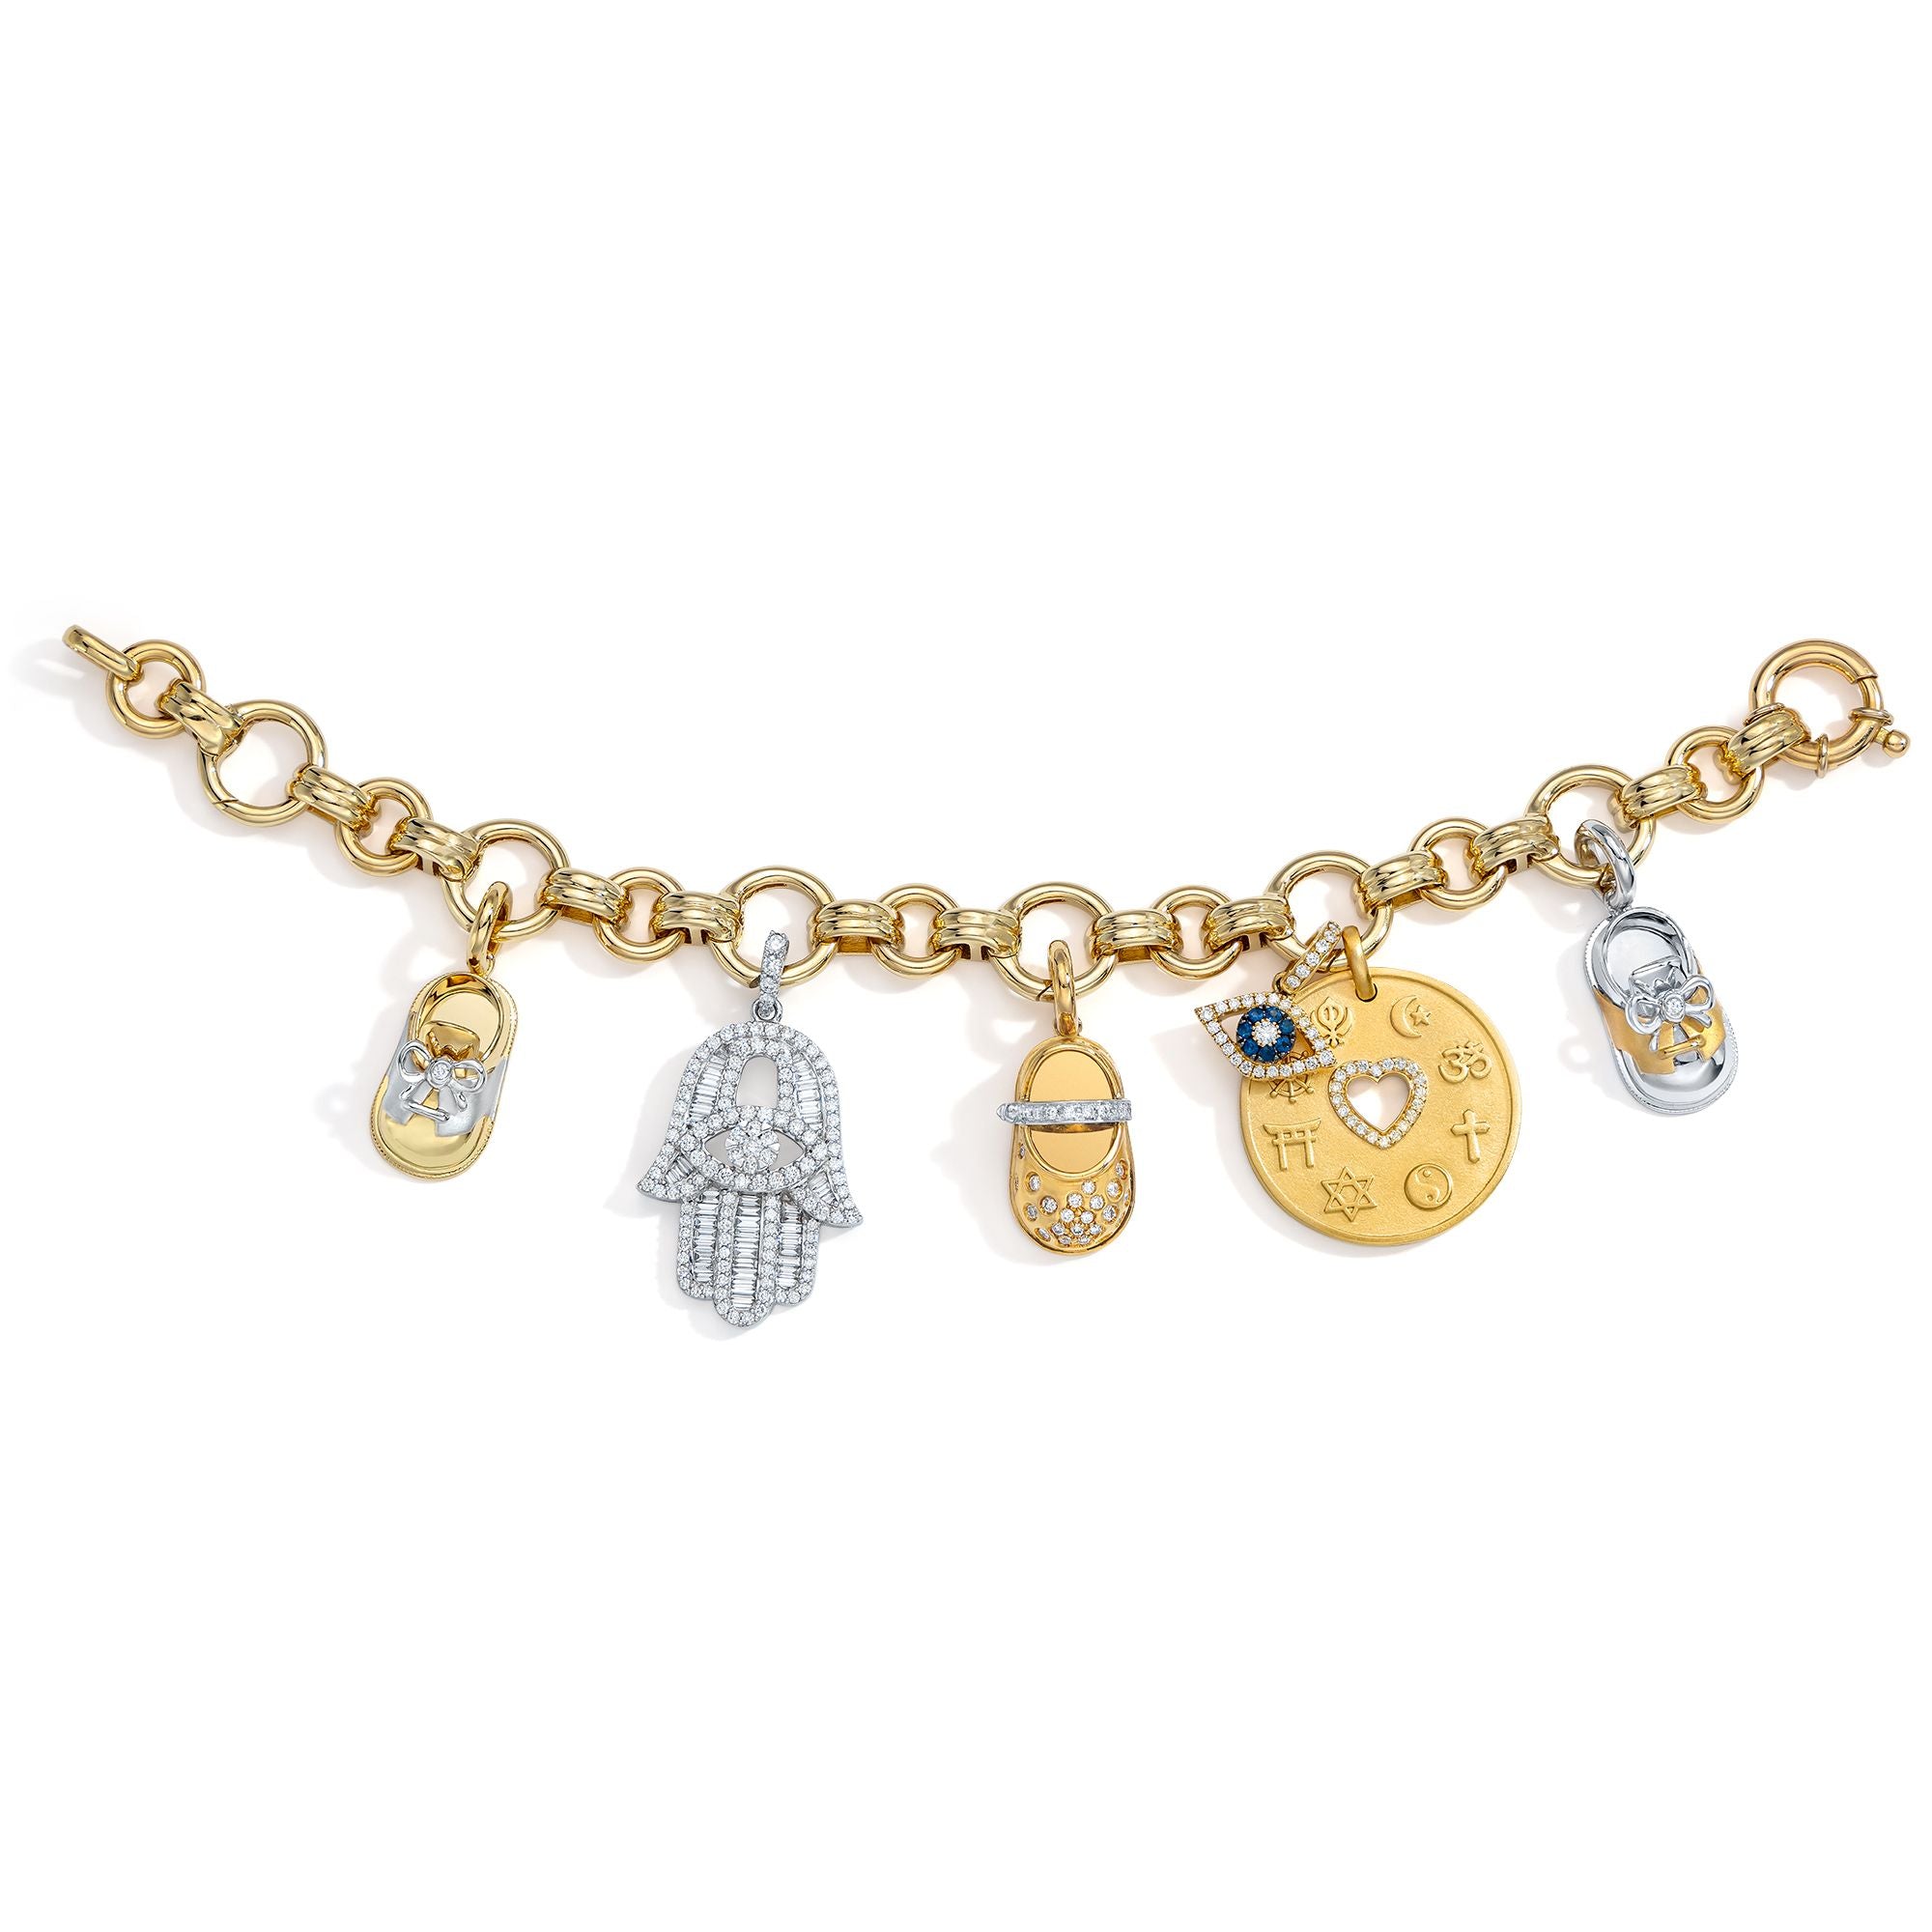 Aaron Basha 18K Charm Bracelet with Charms - Priced Individually 18K Yellow/White Gold 2 Tone Saddle SHOE; .01 Ct. Without Engraving